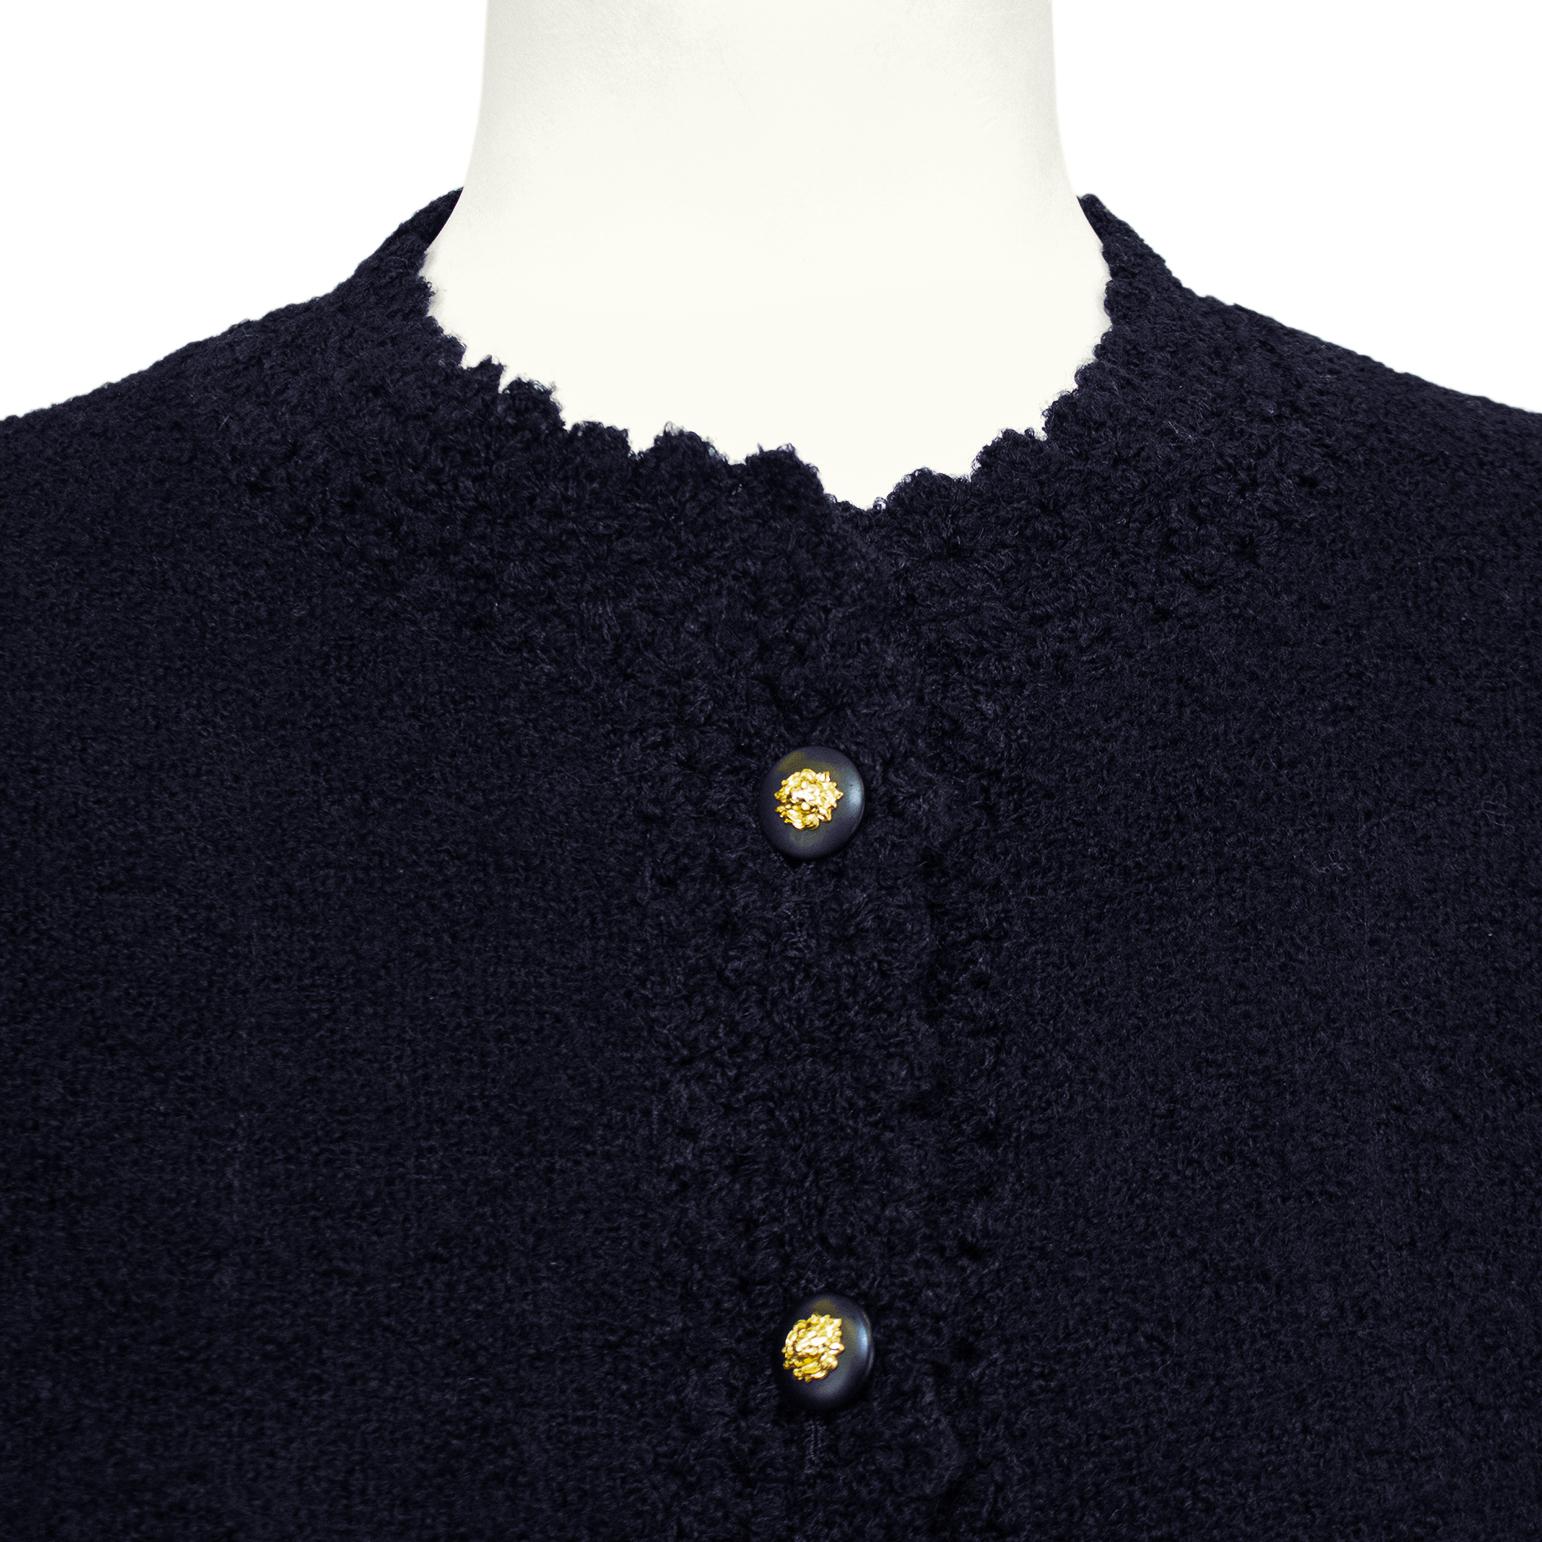 Women's Early 1980s Chanel Haute Couture Navy Blue Boucle Suit Made for Kitty D'Alessio